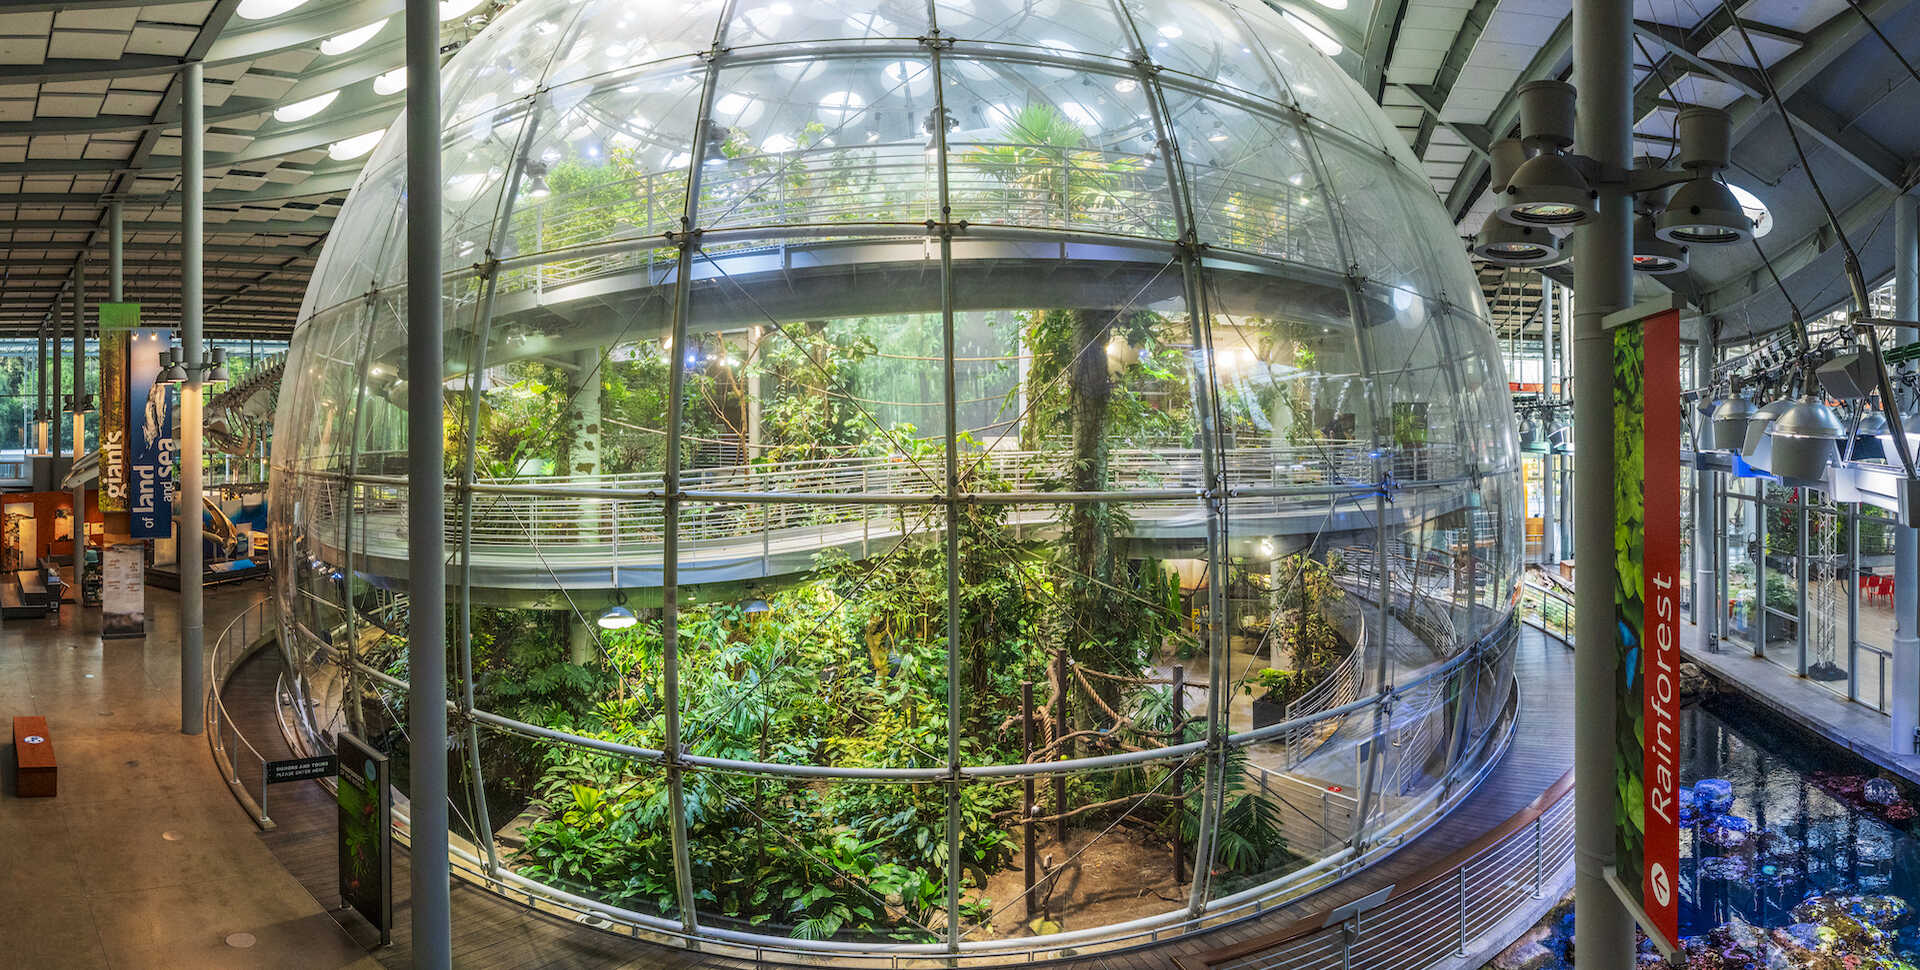 A panoramic image of the Osher Rainforest bolla, or dome, before opening. The glass is clear and plants are visible inside.